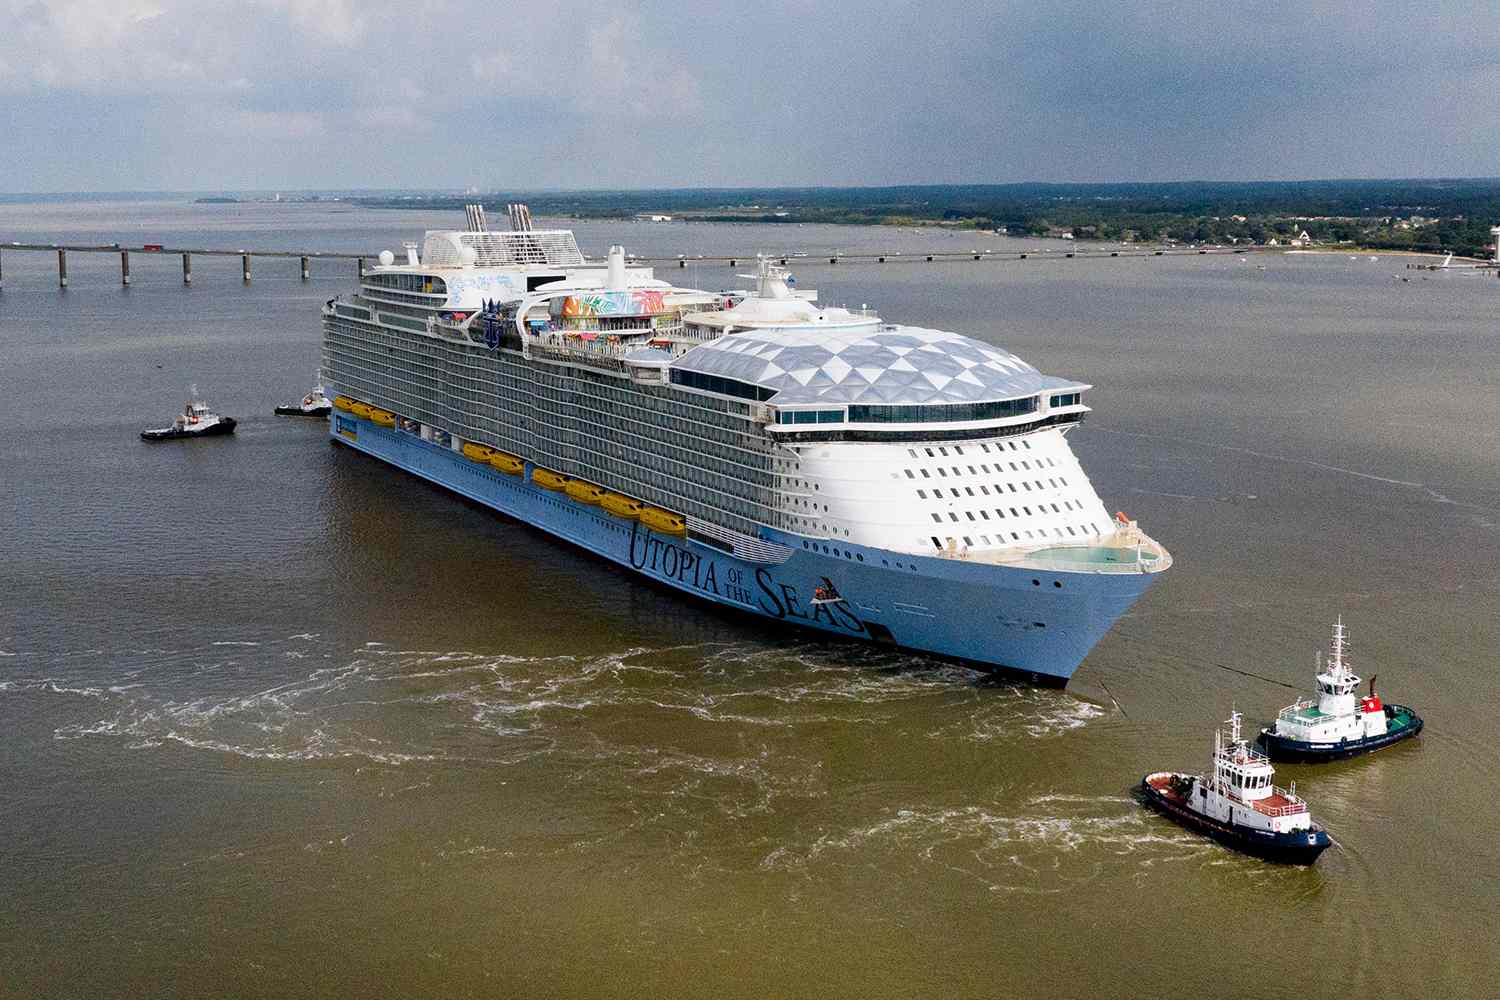 royal caribbean’s newest ship 'utopia of the seas' begins 5-day sea trials with over 900 experts on board — see photos!